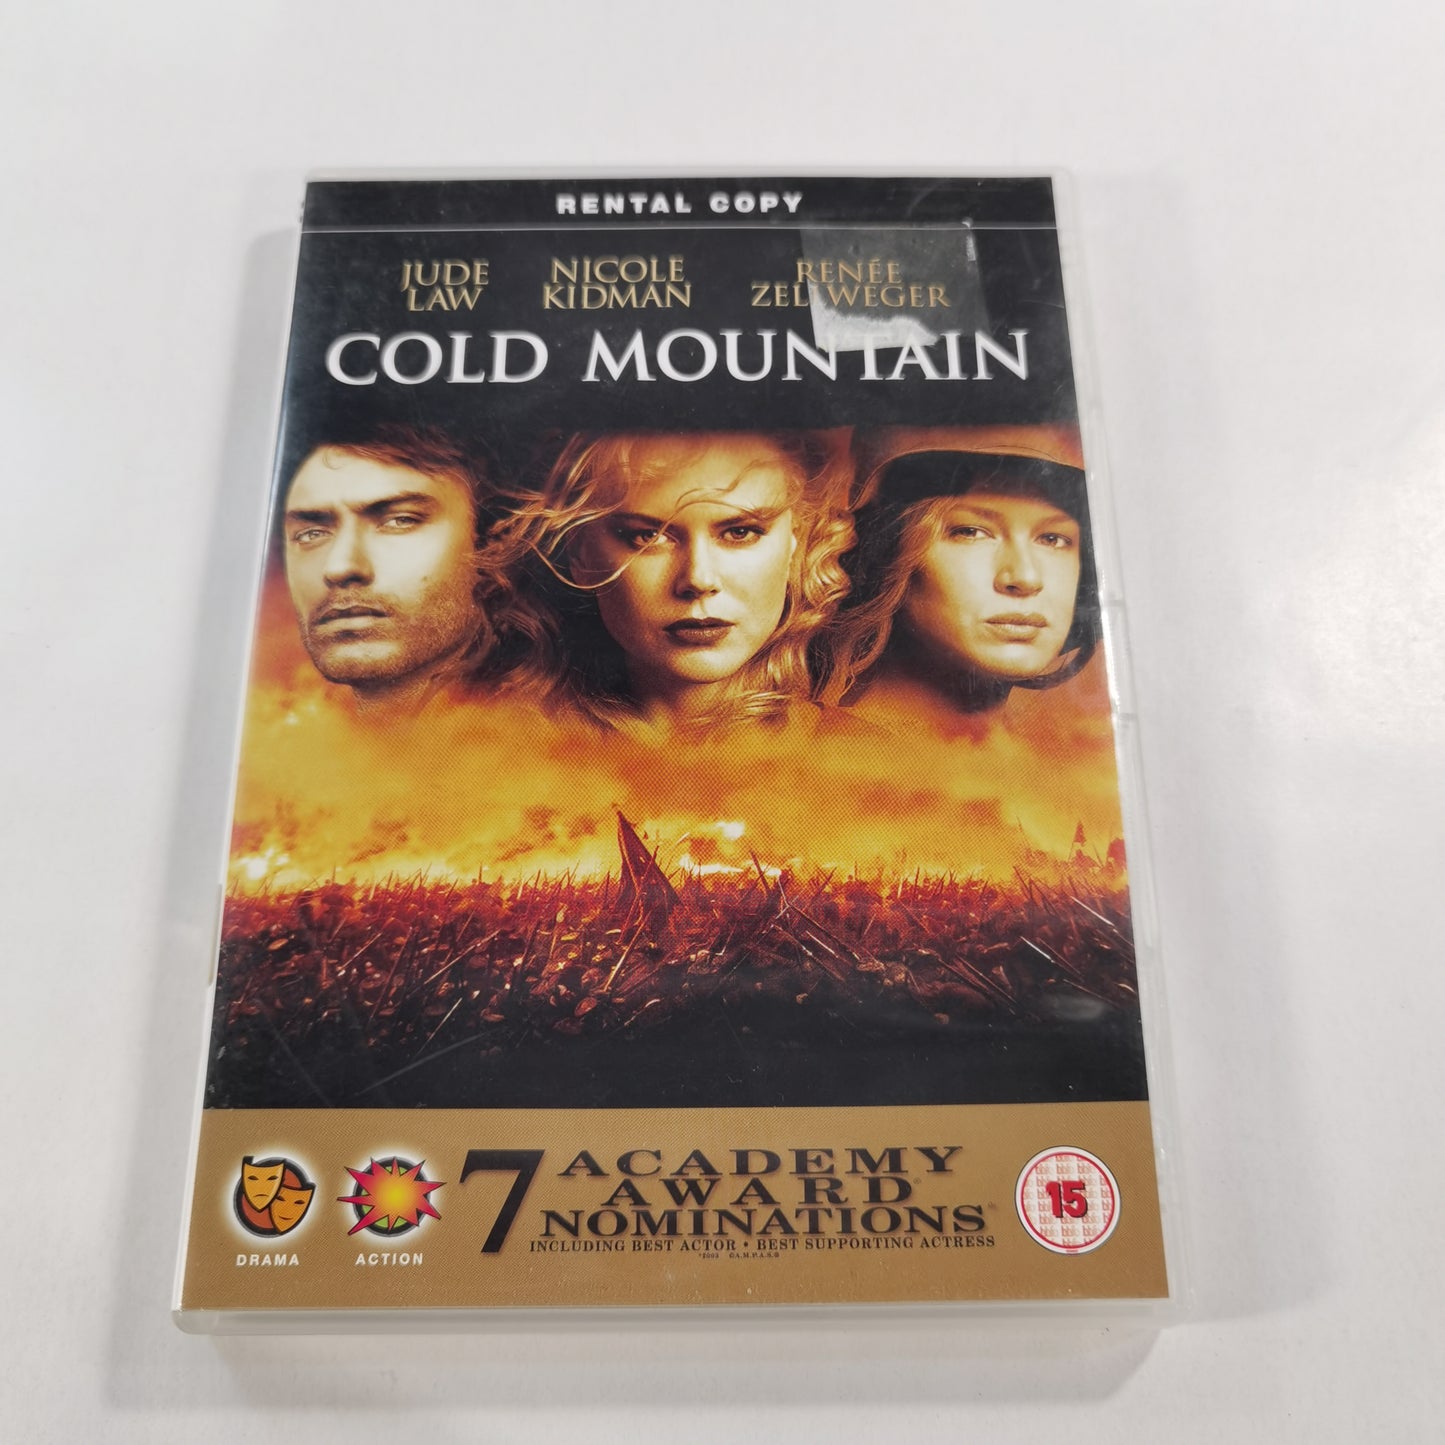 Cold Mountain (2003) - DVD UK RC